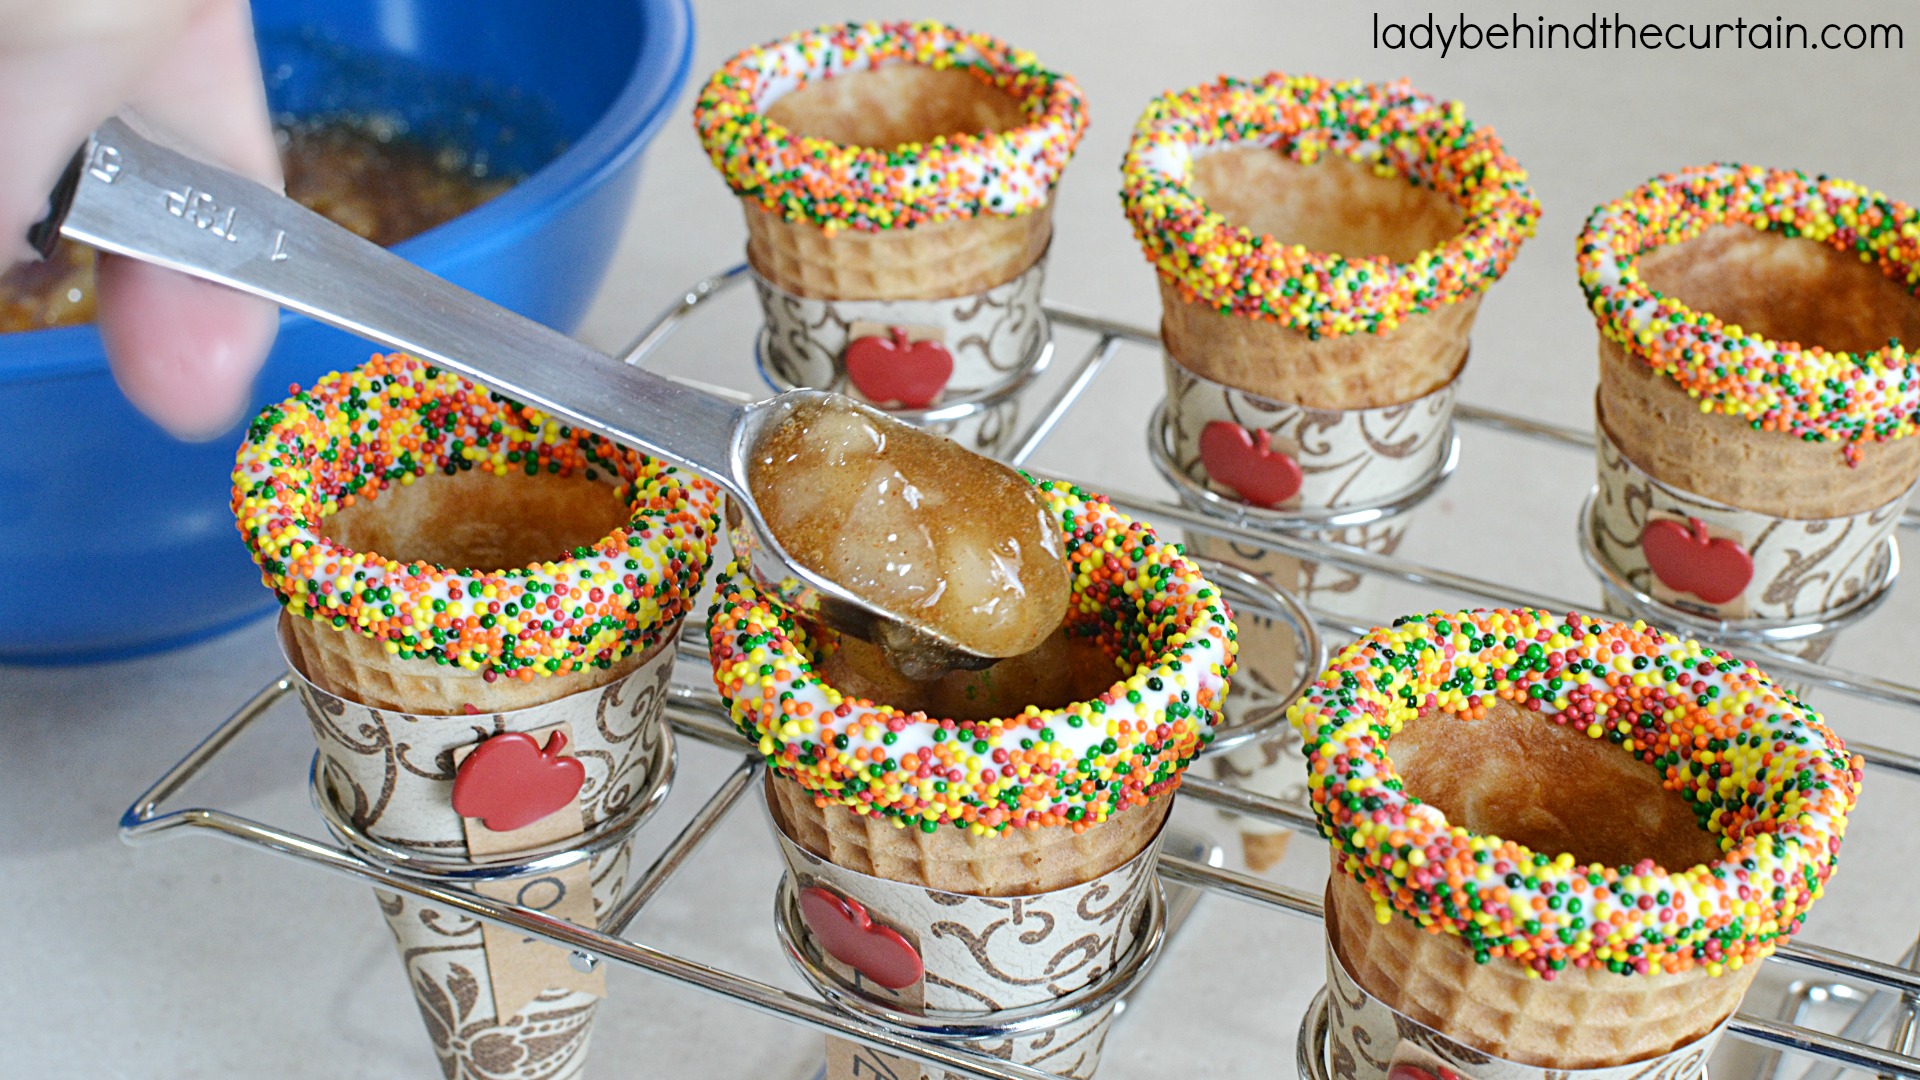 Apple Pie Cheesecake Filled Cones | These fun cones are filled with delicious fluffy cheesecake and little pockets of apple pie filling. A fun and easy was to serve your guests no bake cheesecake!